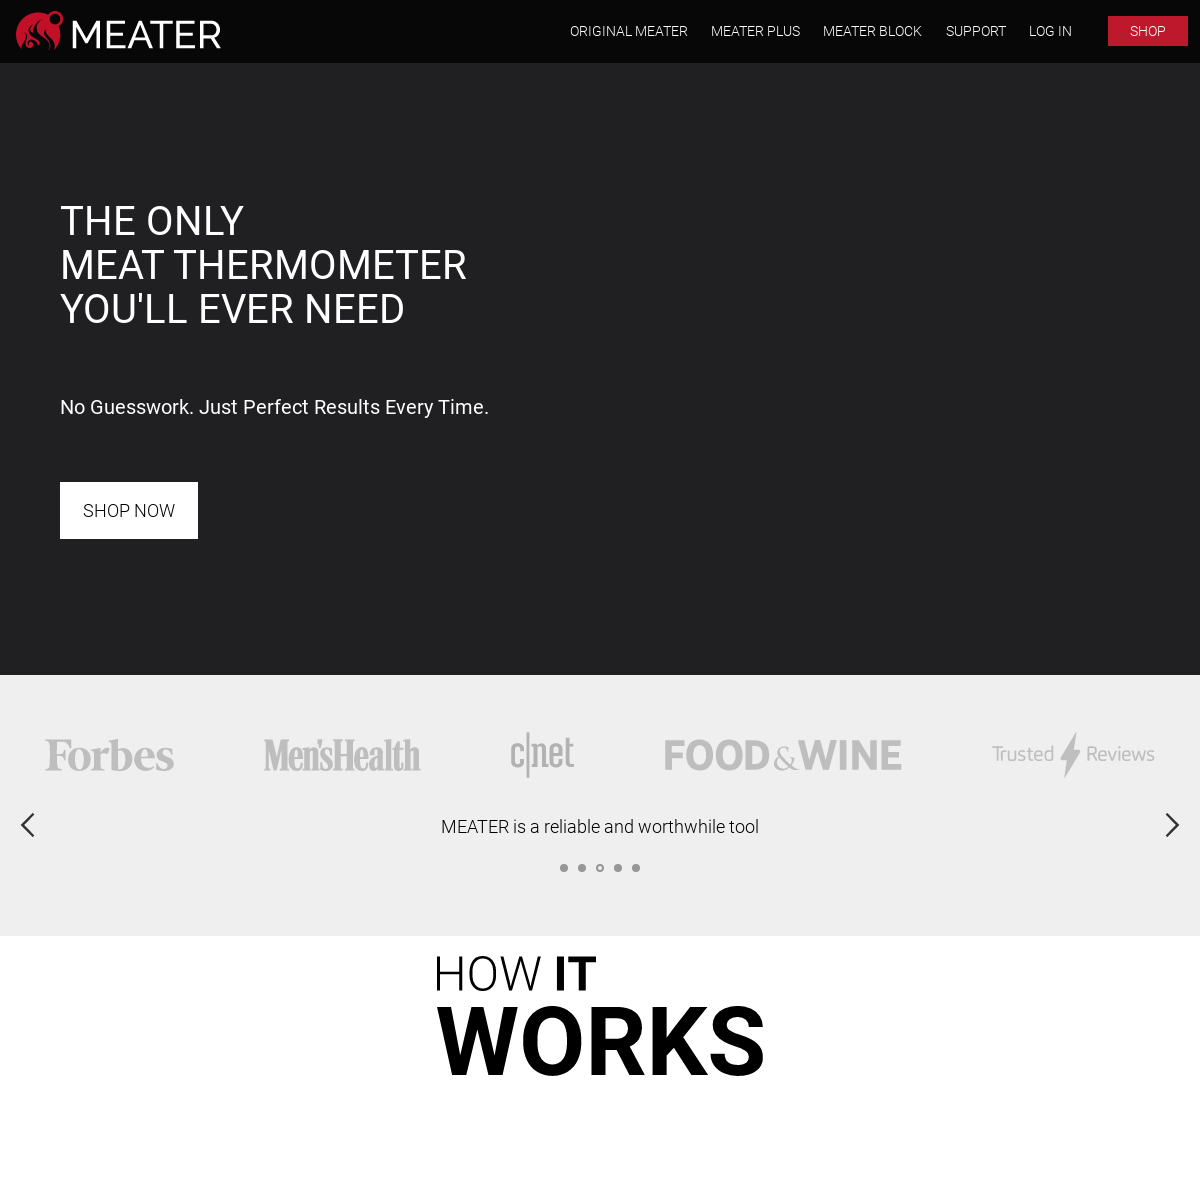 A complete backup of meater.com